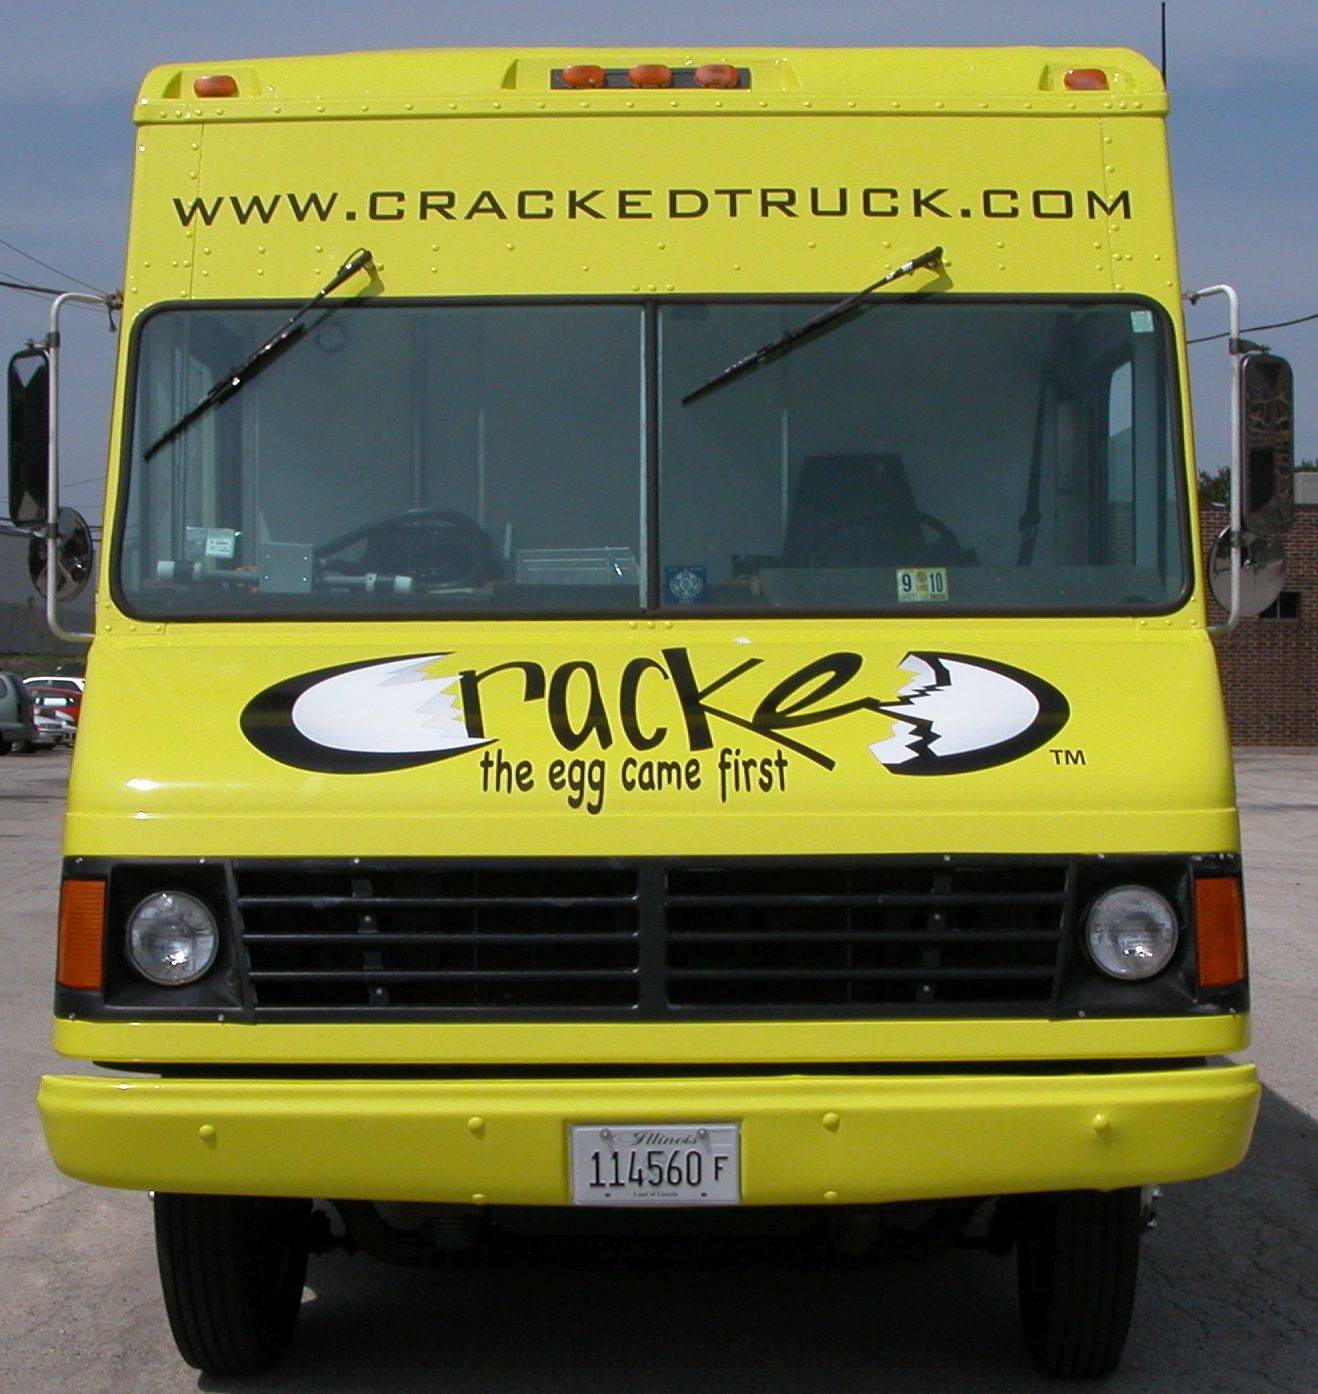 Still all it’s cracked up to be: Cracked Truck reviewed